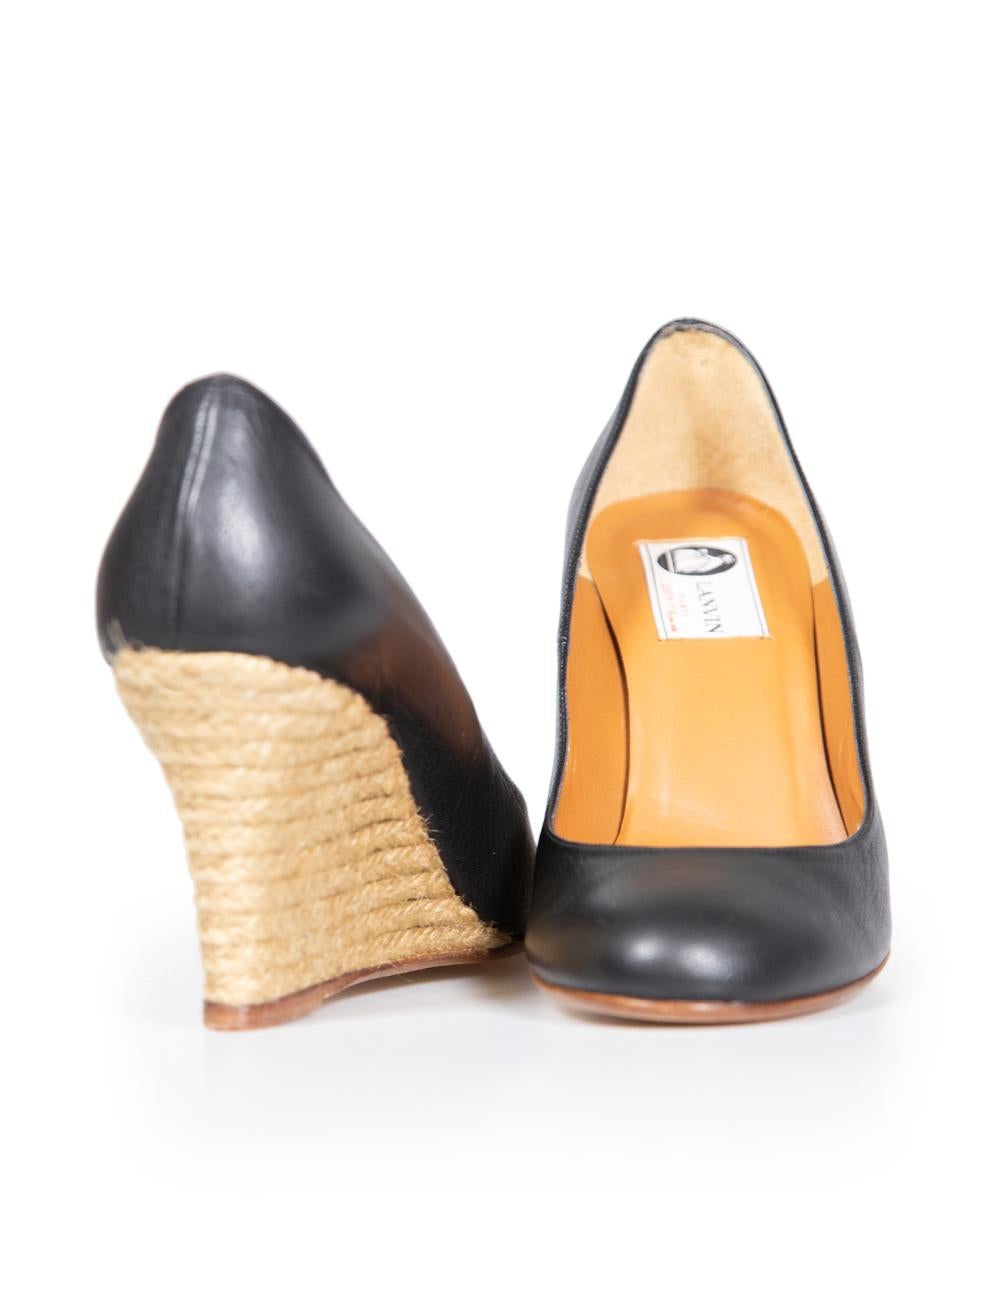 Lanvin Black Leather Espadrilles Wedges Size IT 36 In New Condition For Sale In London, GB